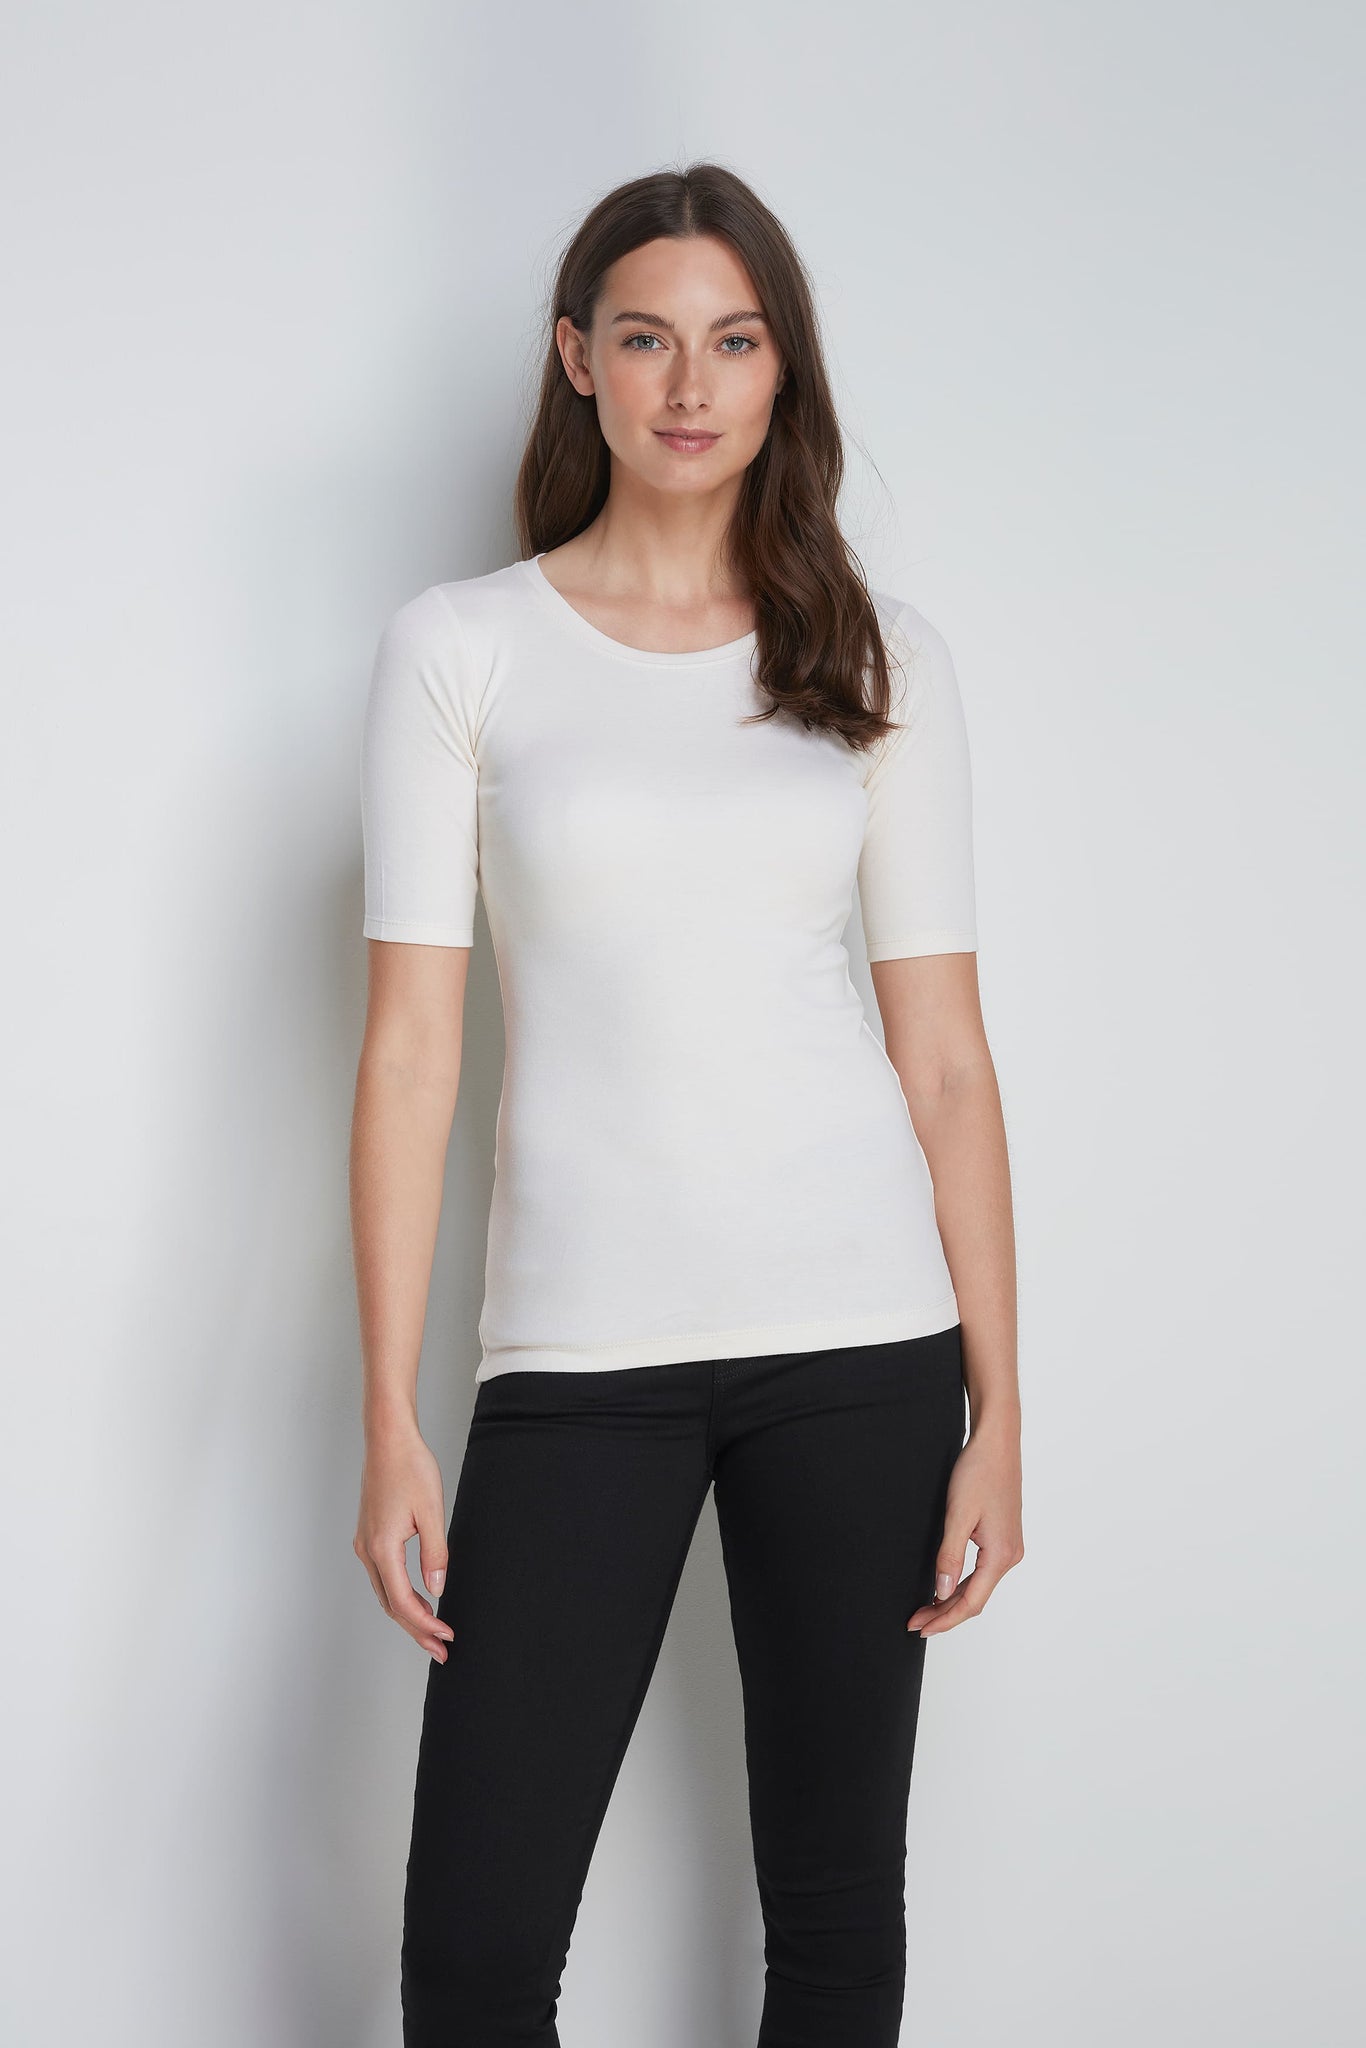 Mid-Weight Flattering Half Sleeve Cream Crew Neck T-Shirt - Quality Half Sleeve Scoop - Classic Silhouette by Lavender Hill Clothing